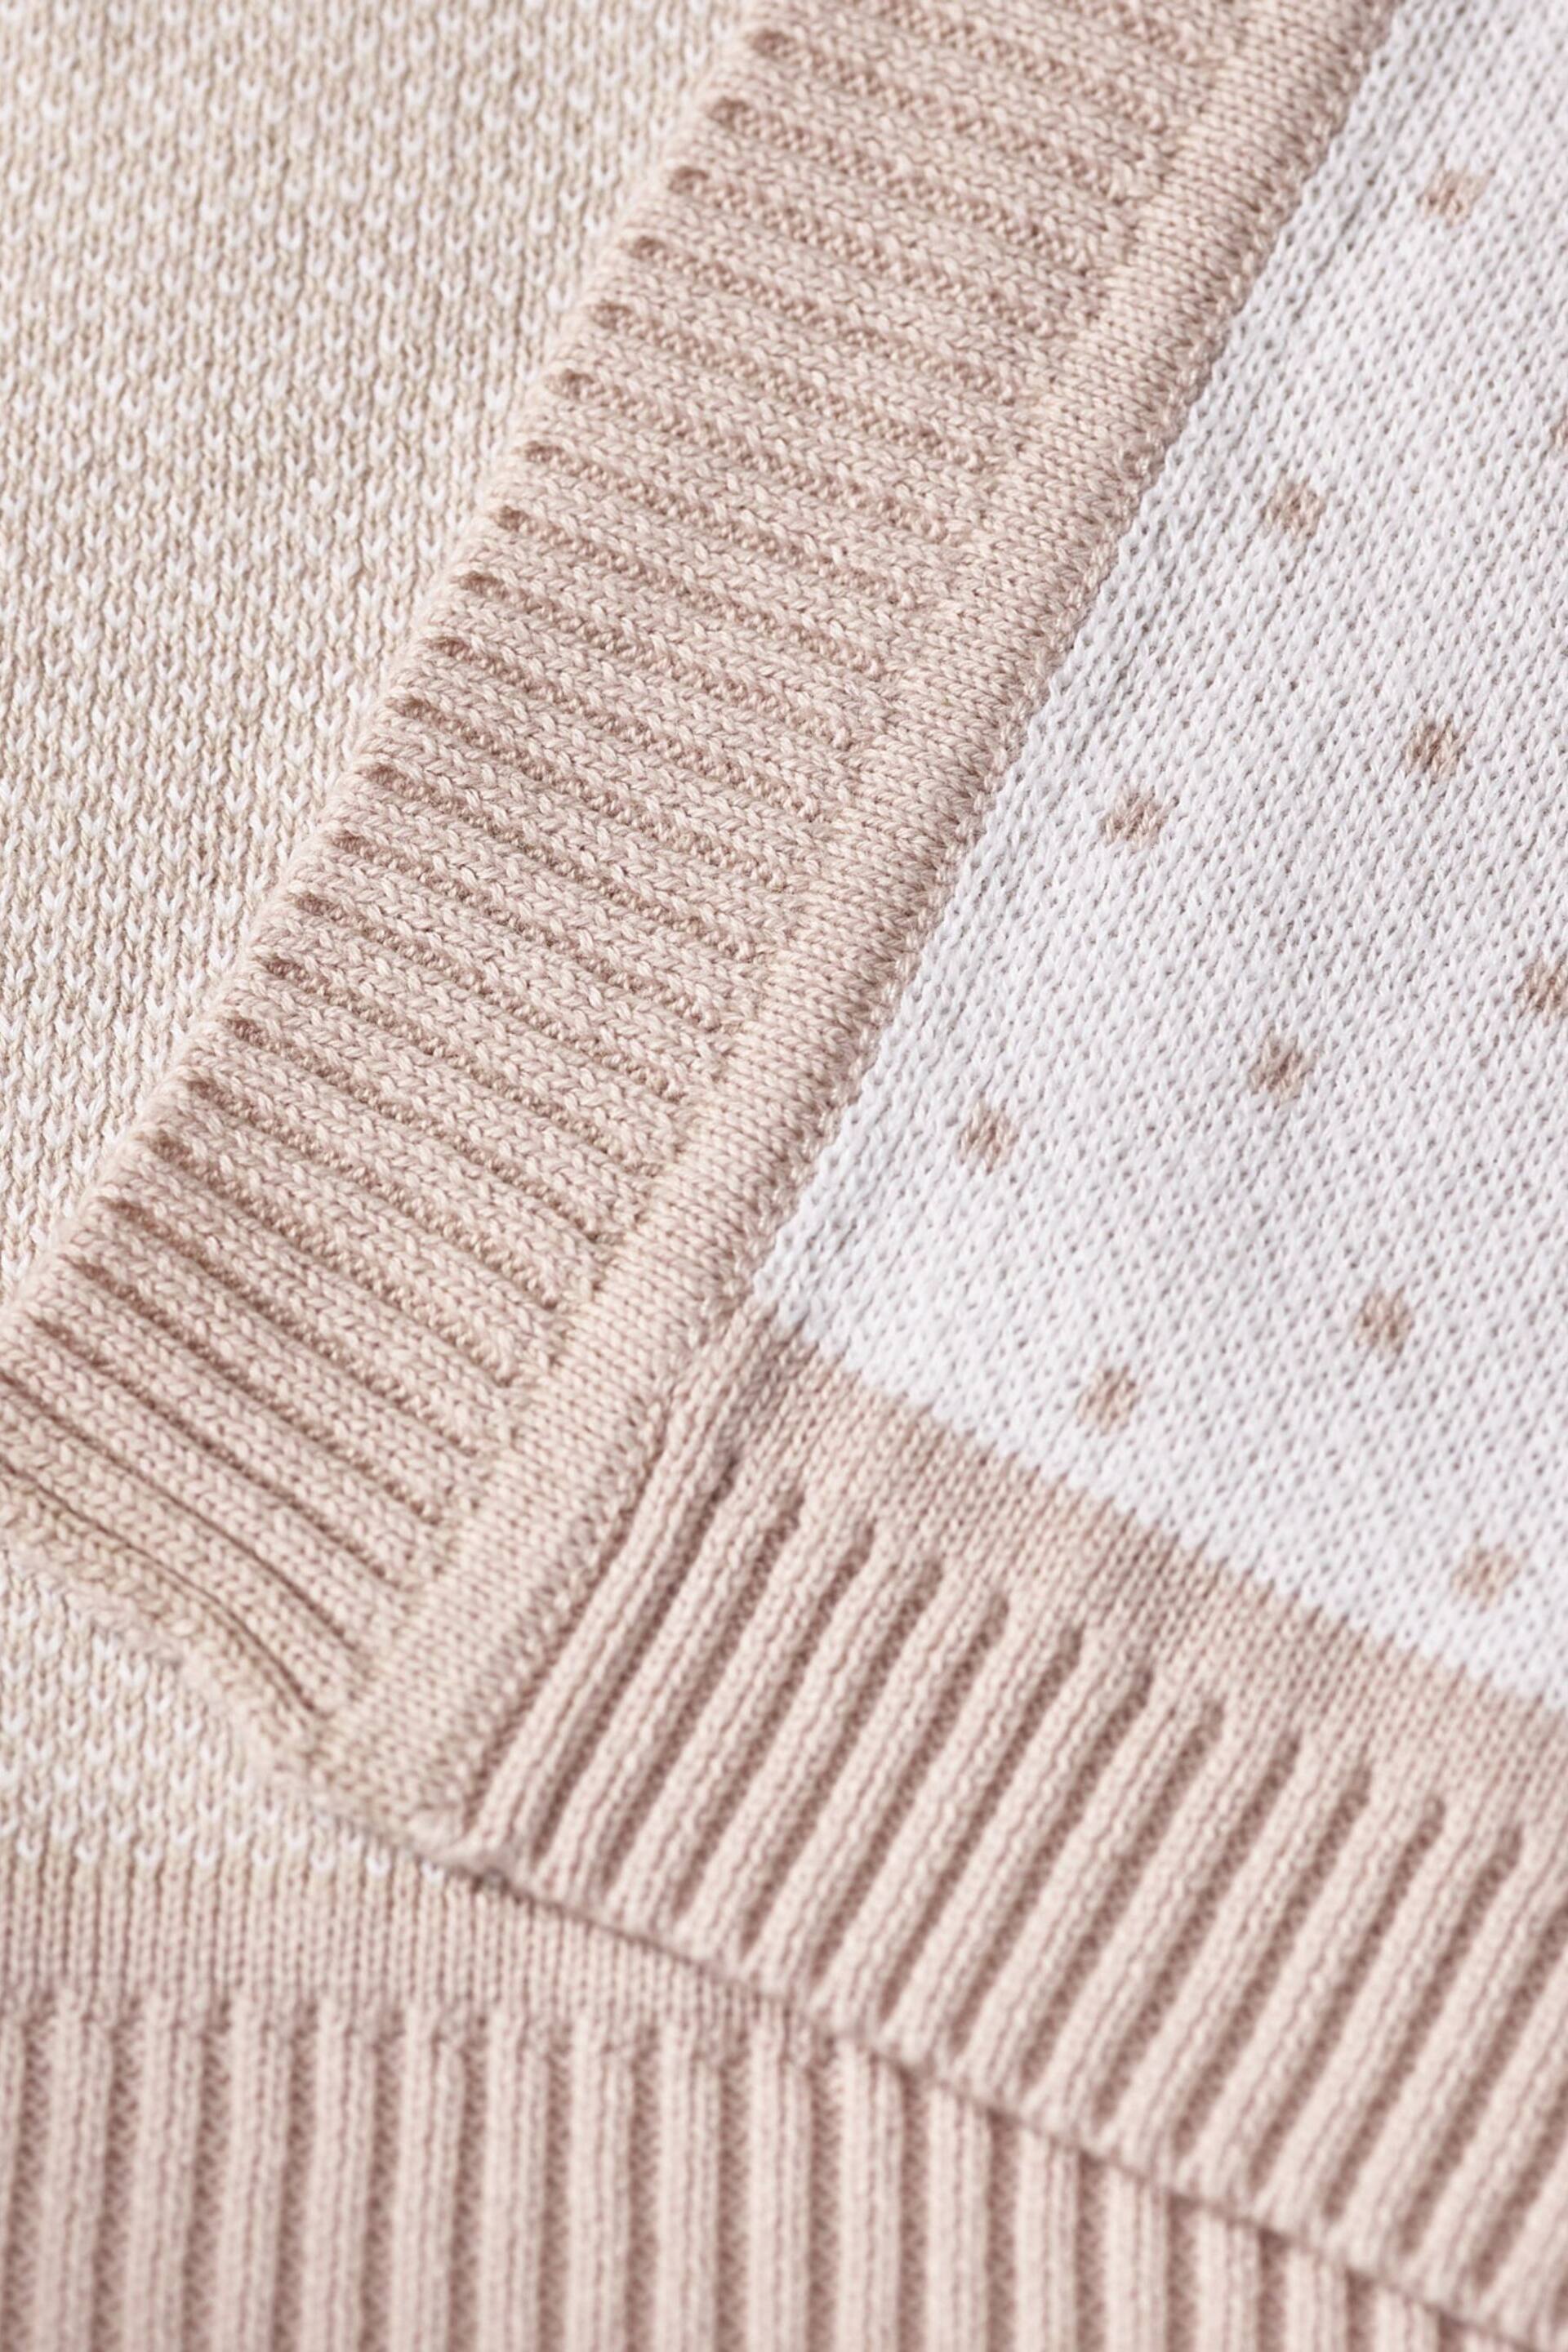 The White Company Pink Pom Bunny Baby Blanket - Image 3 of 3